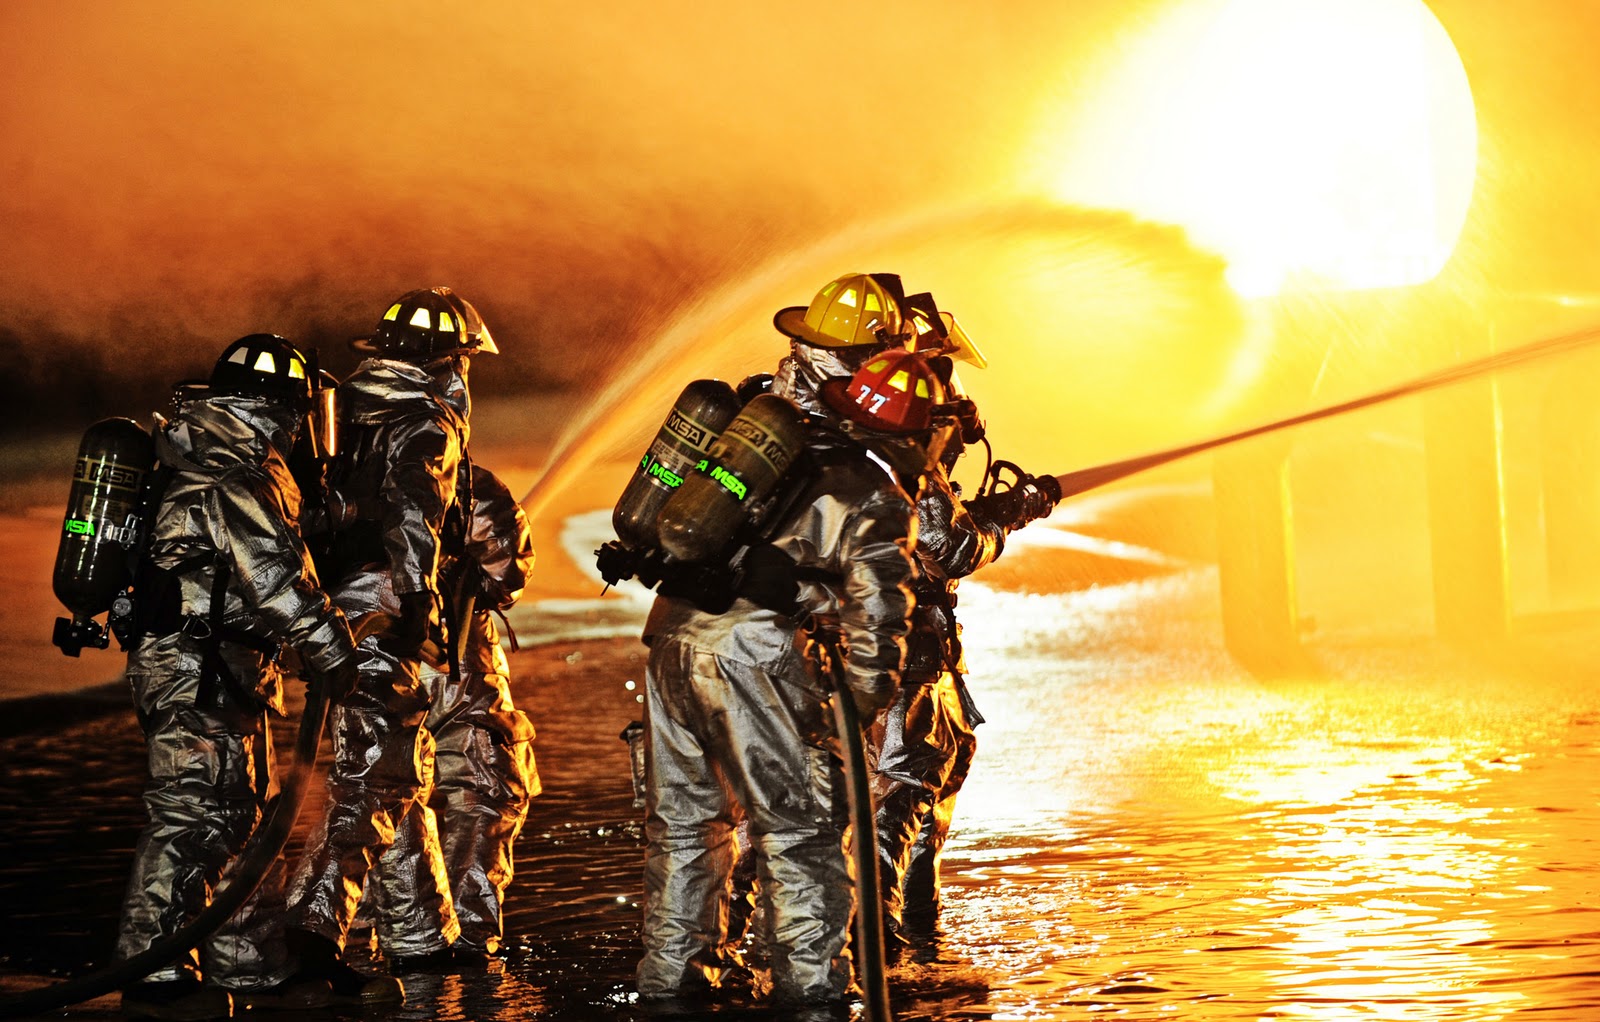 The Public Domain Fire Fighters